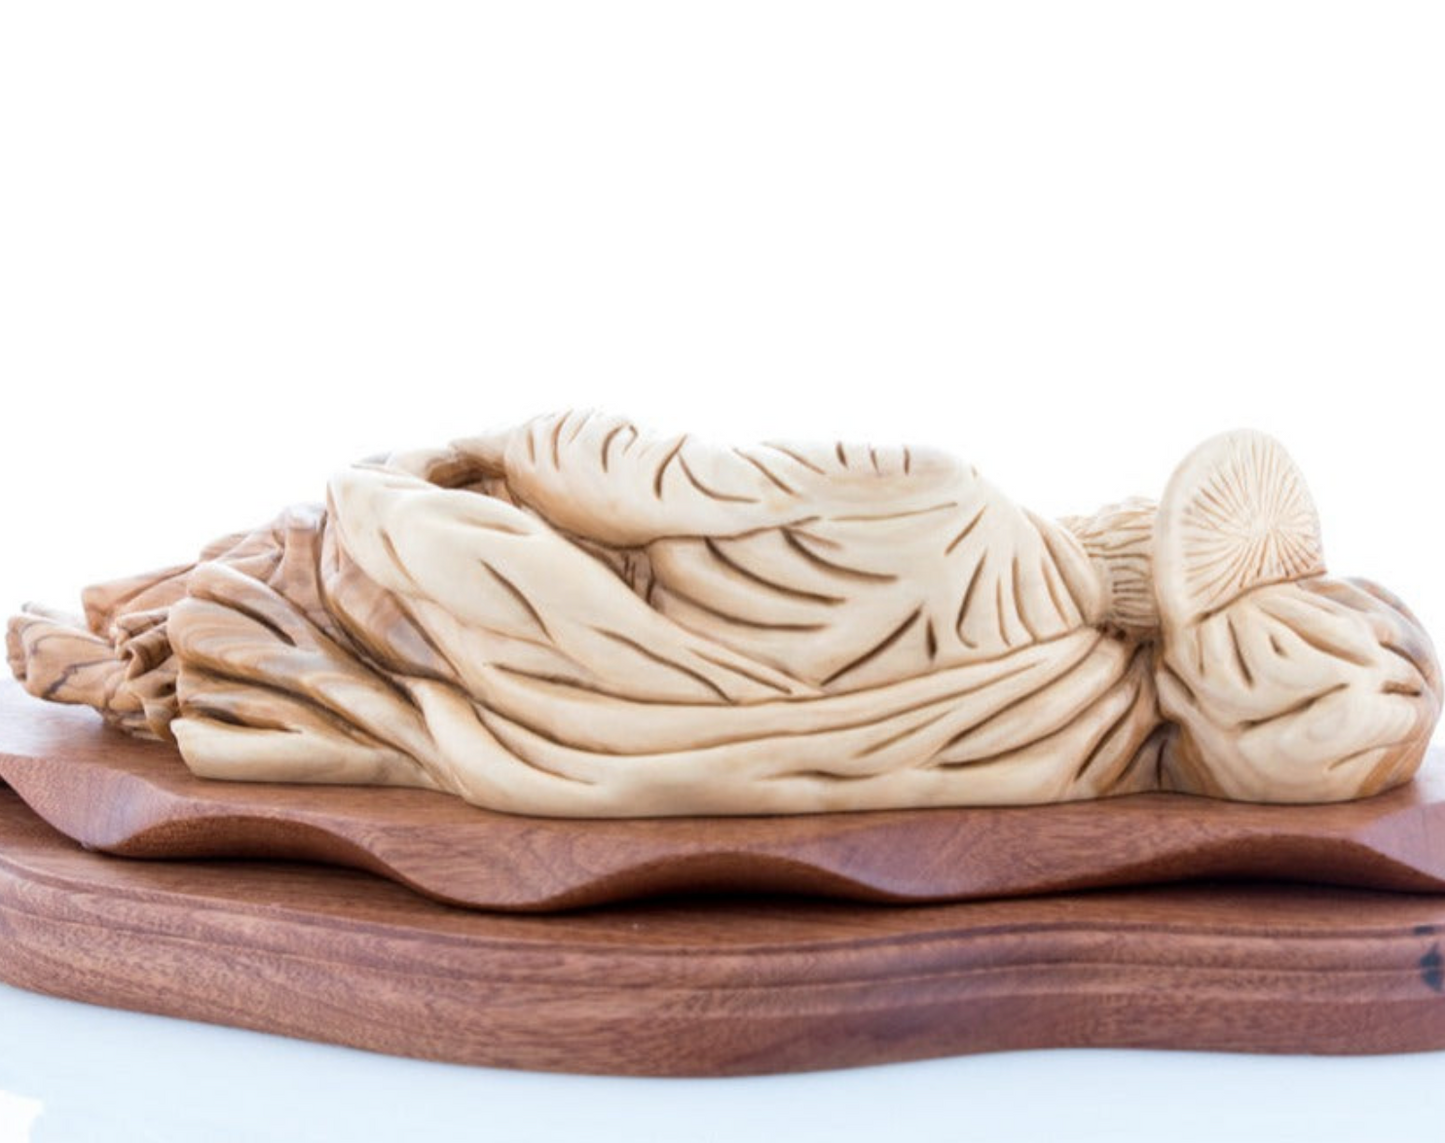 Sleeping Saint Joesph carved Statue from Olive Wood